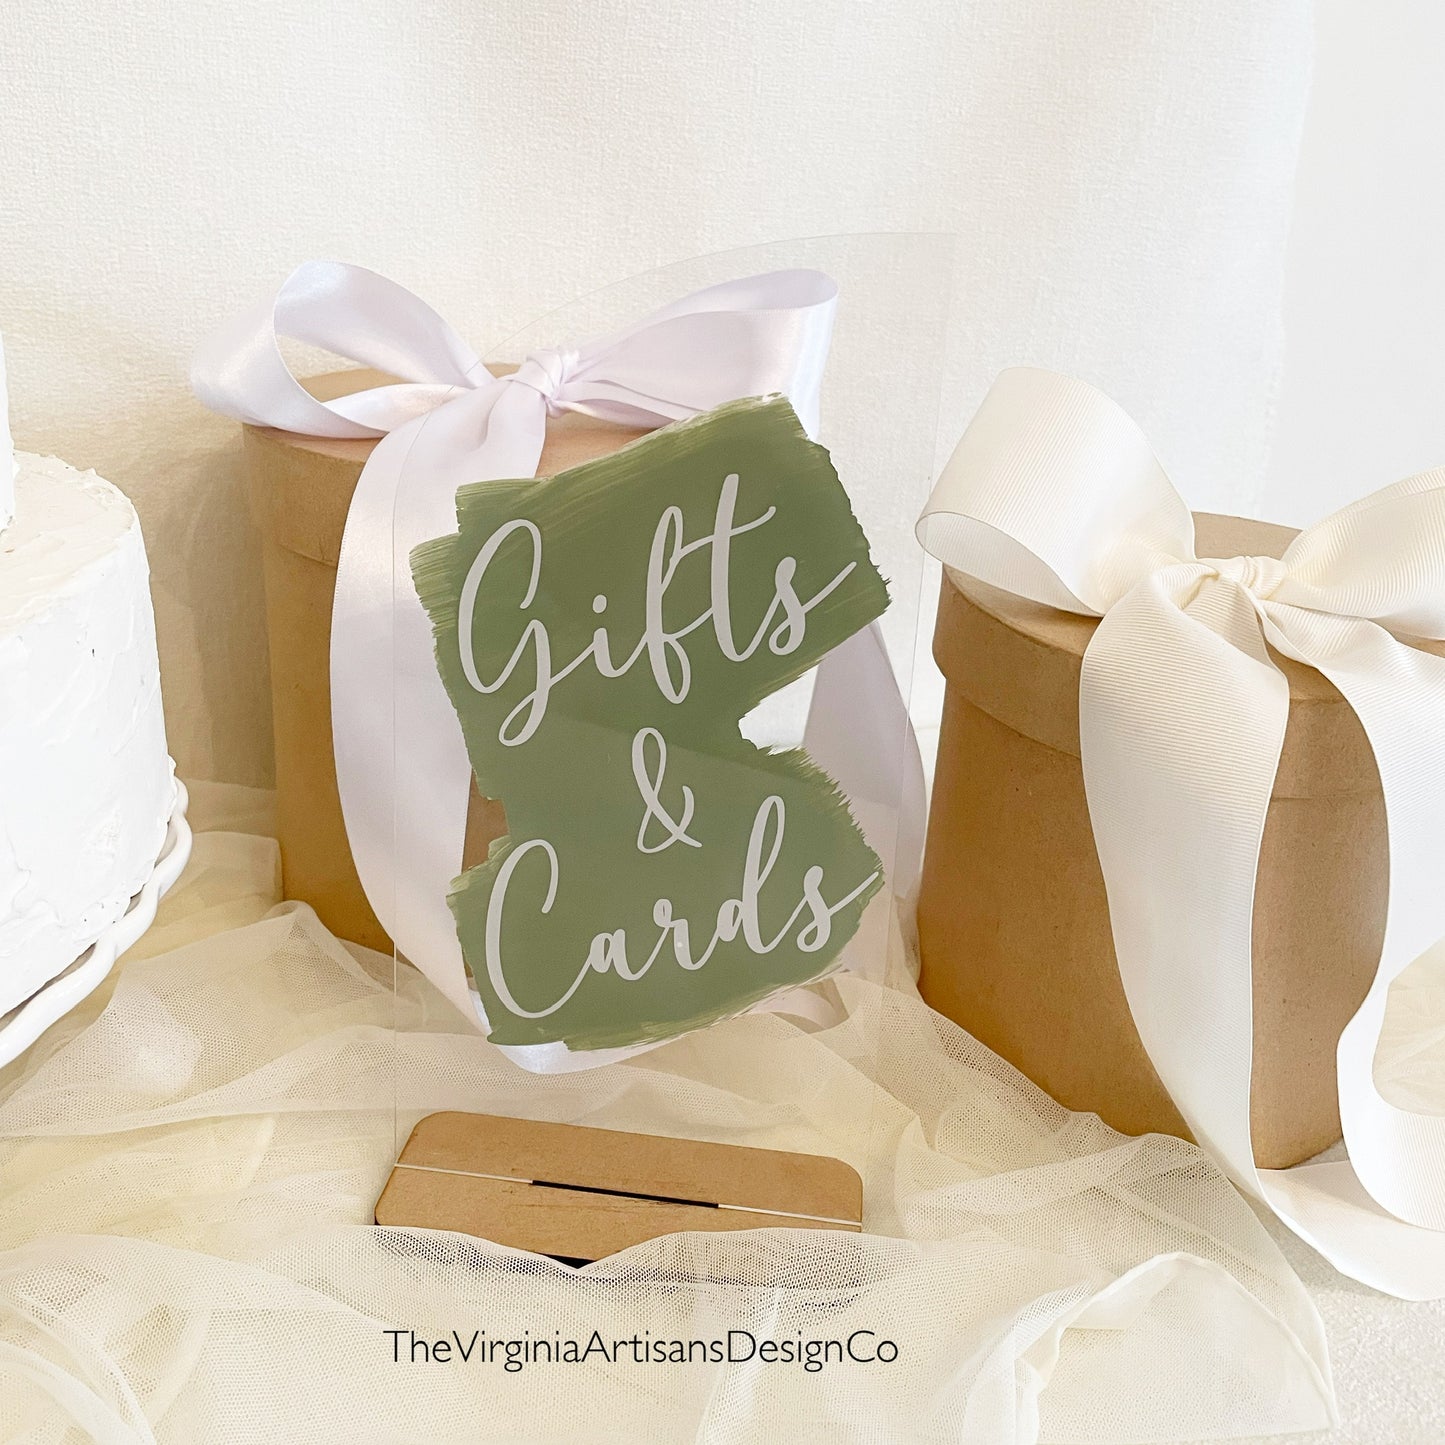 Gifts and Cards Table Sign - Clear Acrylic with Sage Color